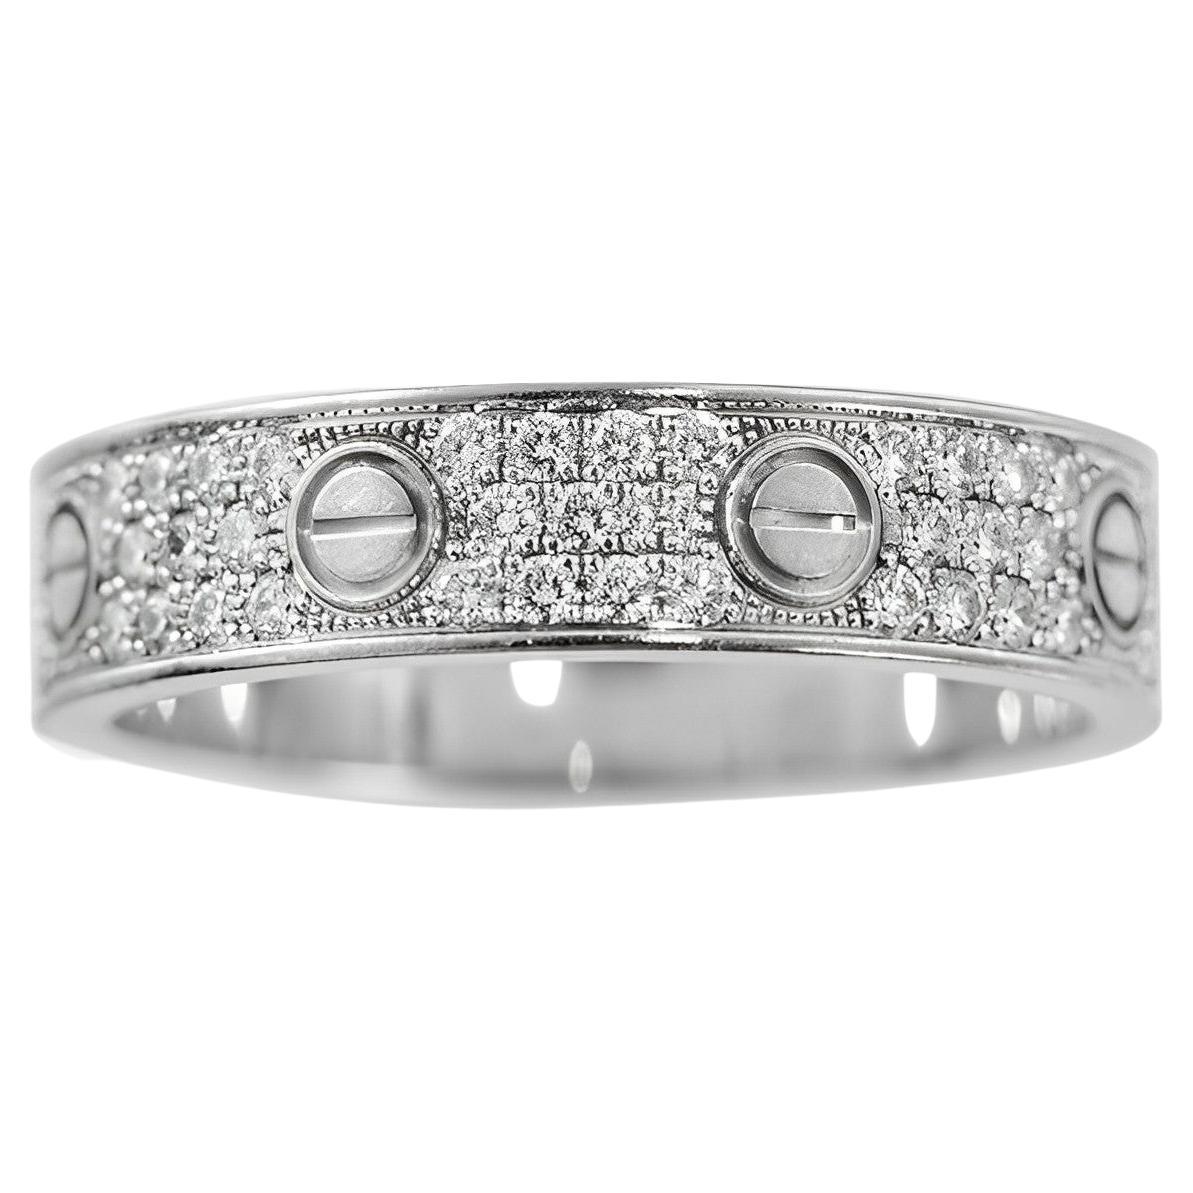 Cartier Love Wedding Diamond-Paved White Gold Ring Size 55